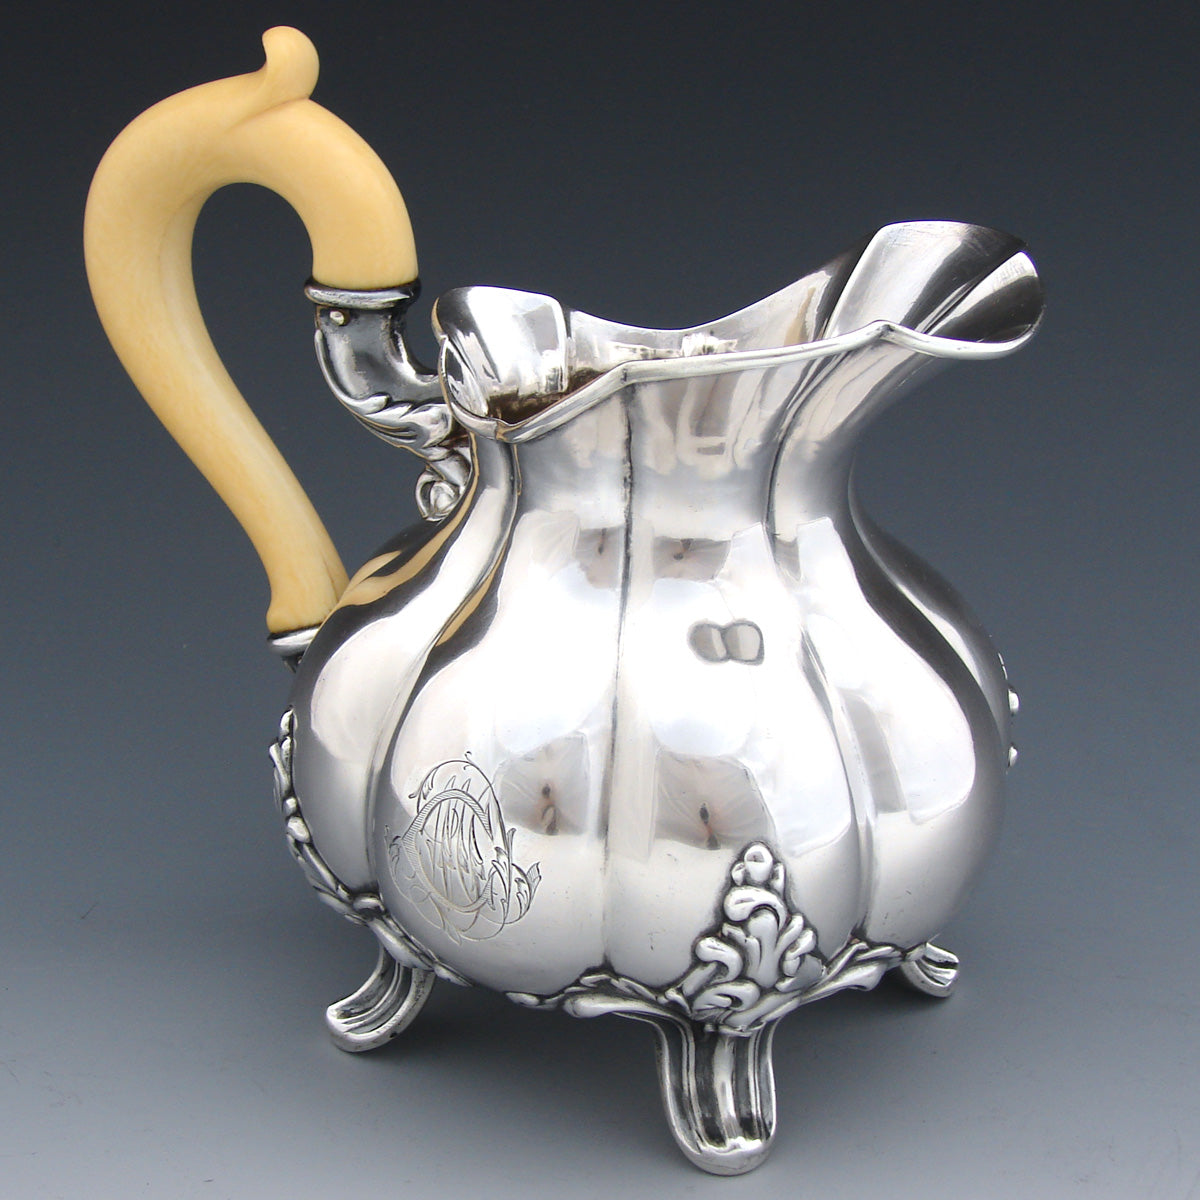 Antique French Sterling Silver Aesthetic Style Creamer or Cream Jug, Pitcher, Lobed Shape